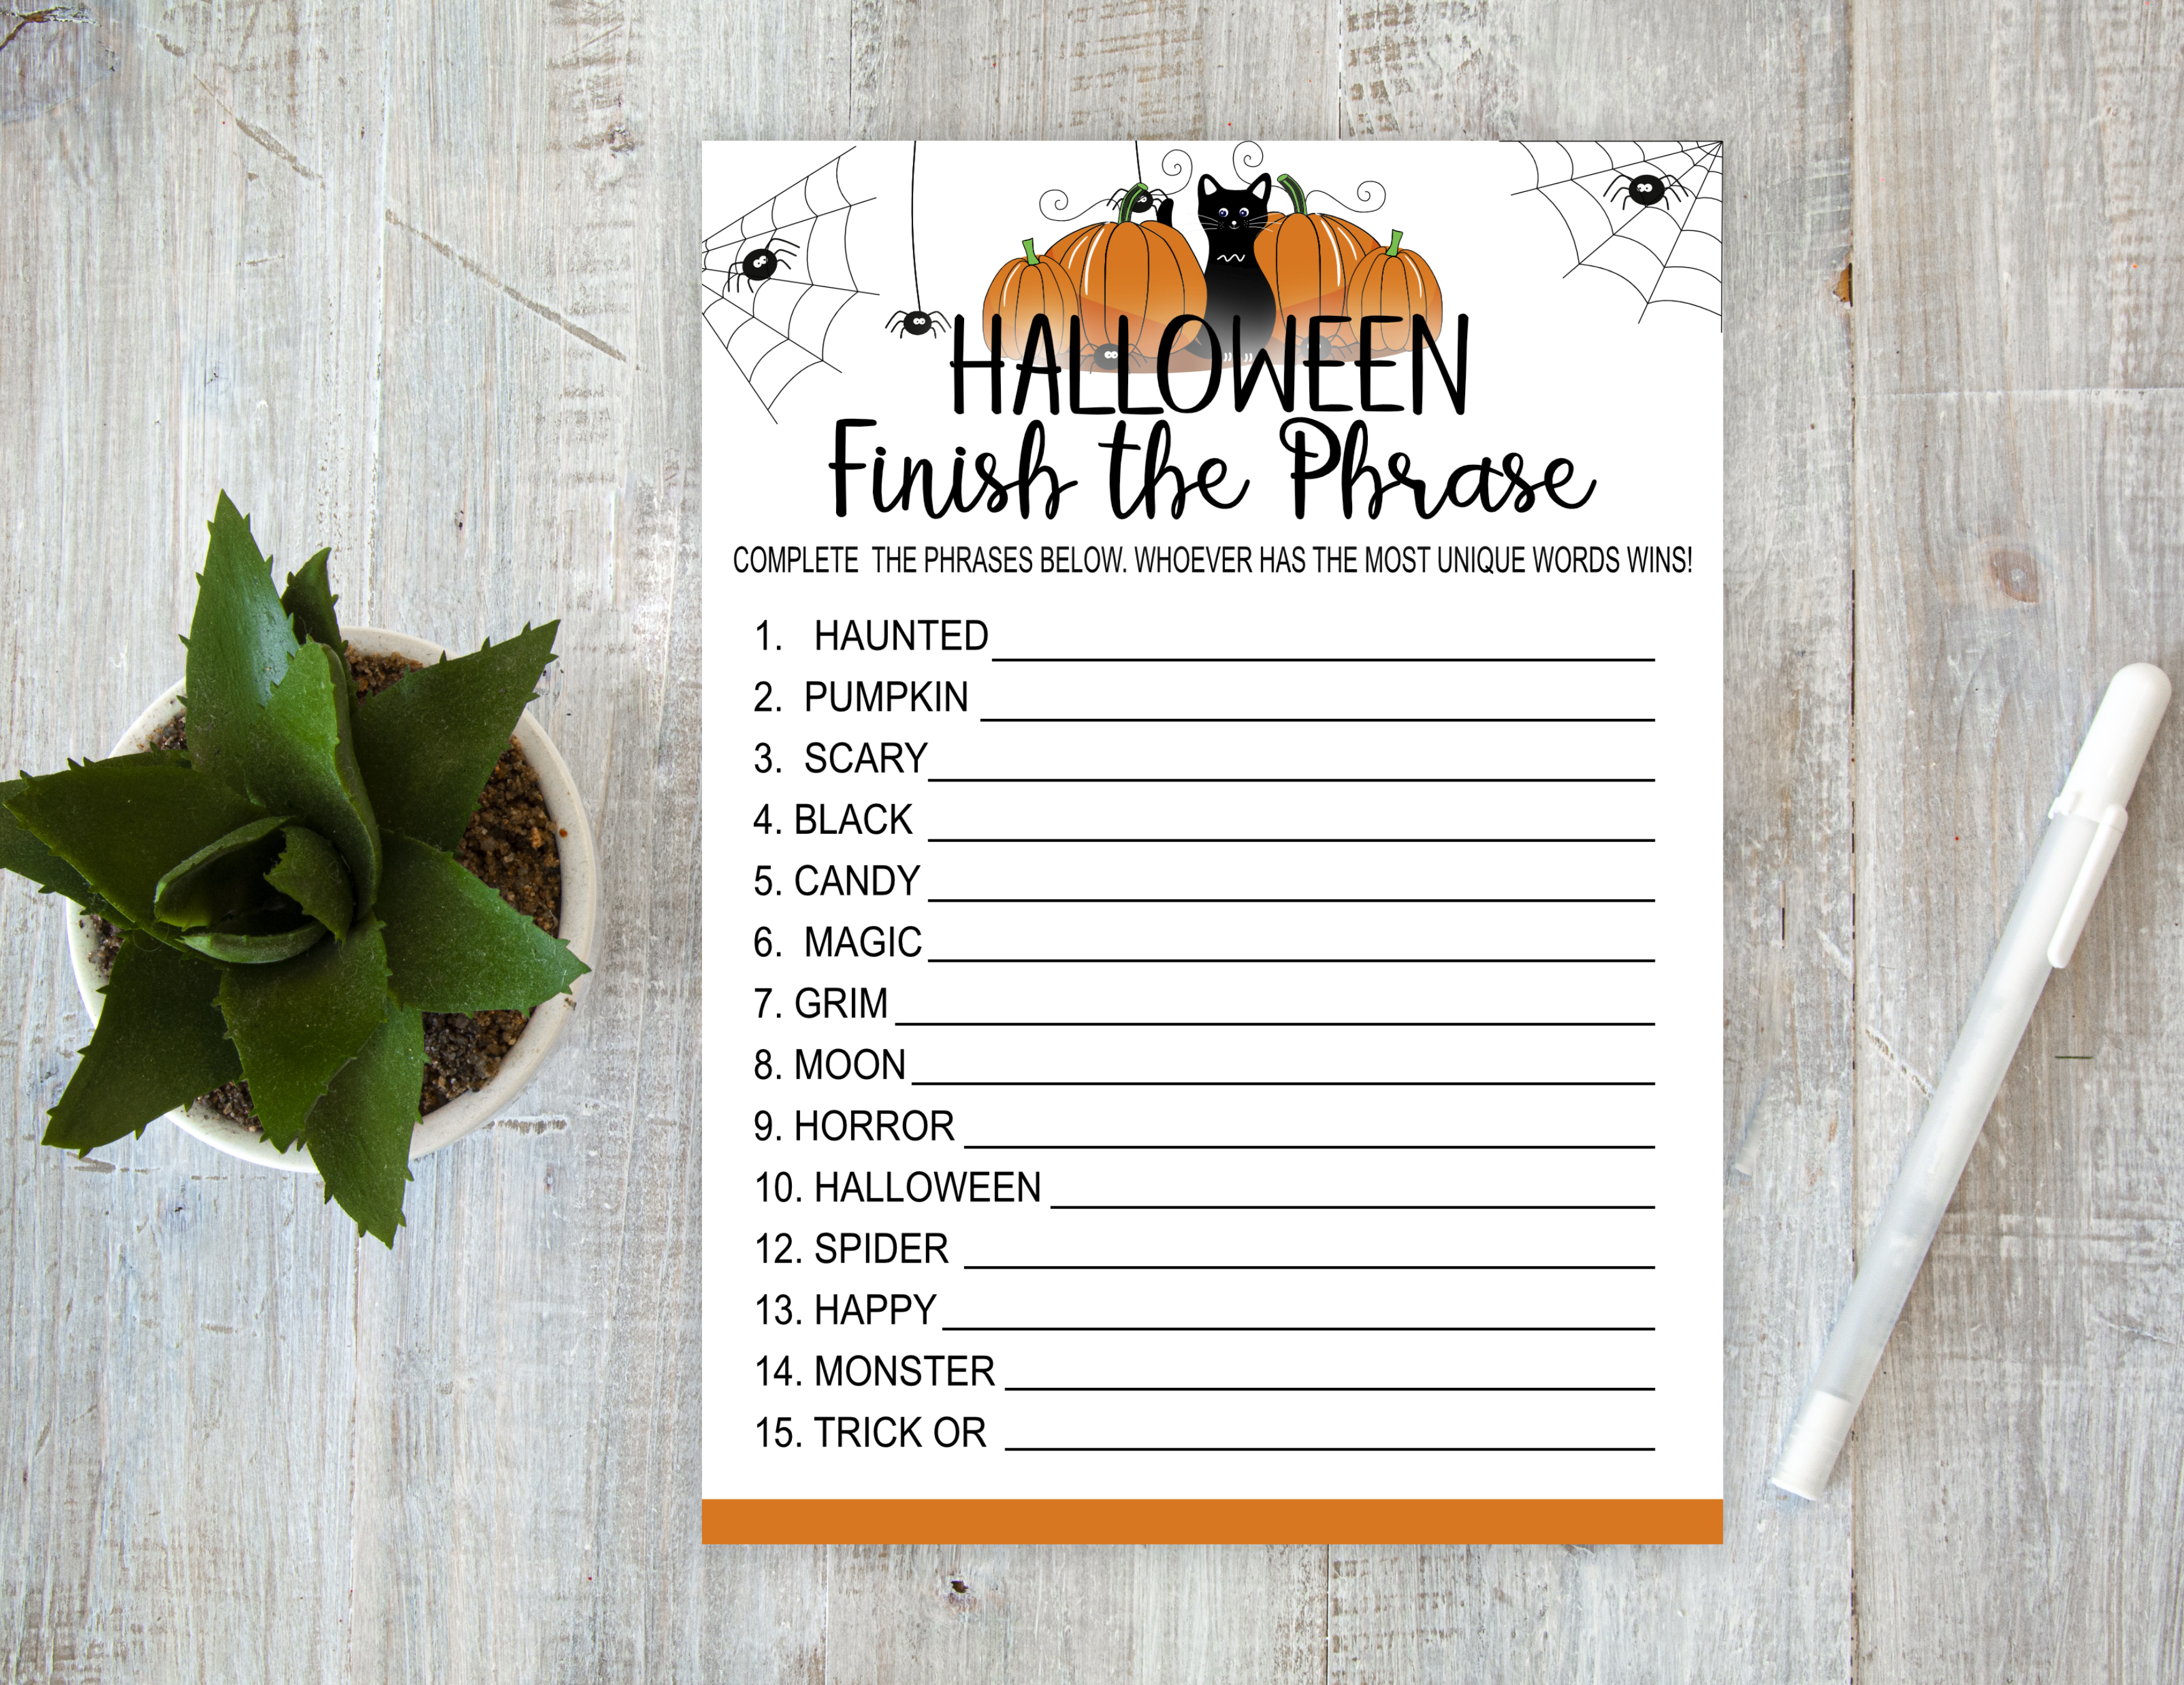 Halloween Halloween Party Game: Finish the Phrase – Printable Fun Game for Halloween Finish the Phrase Game